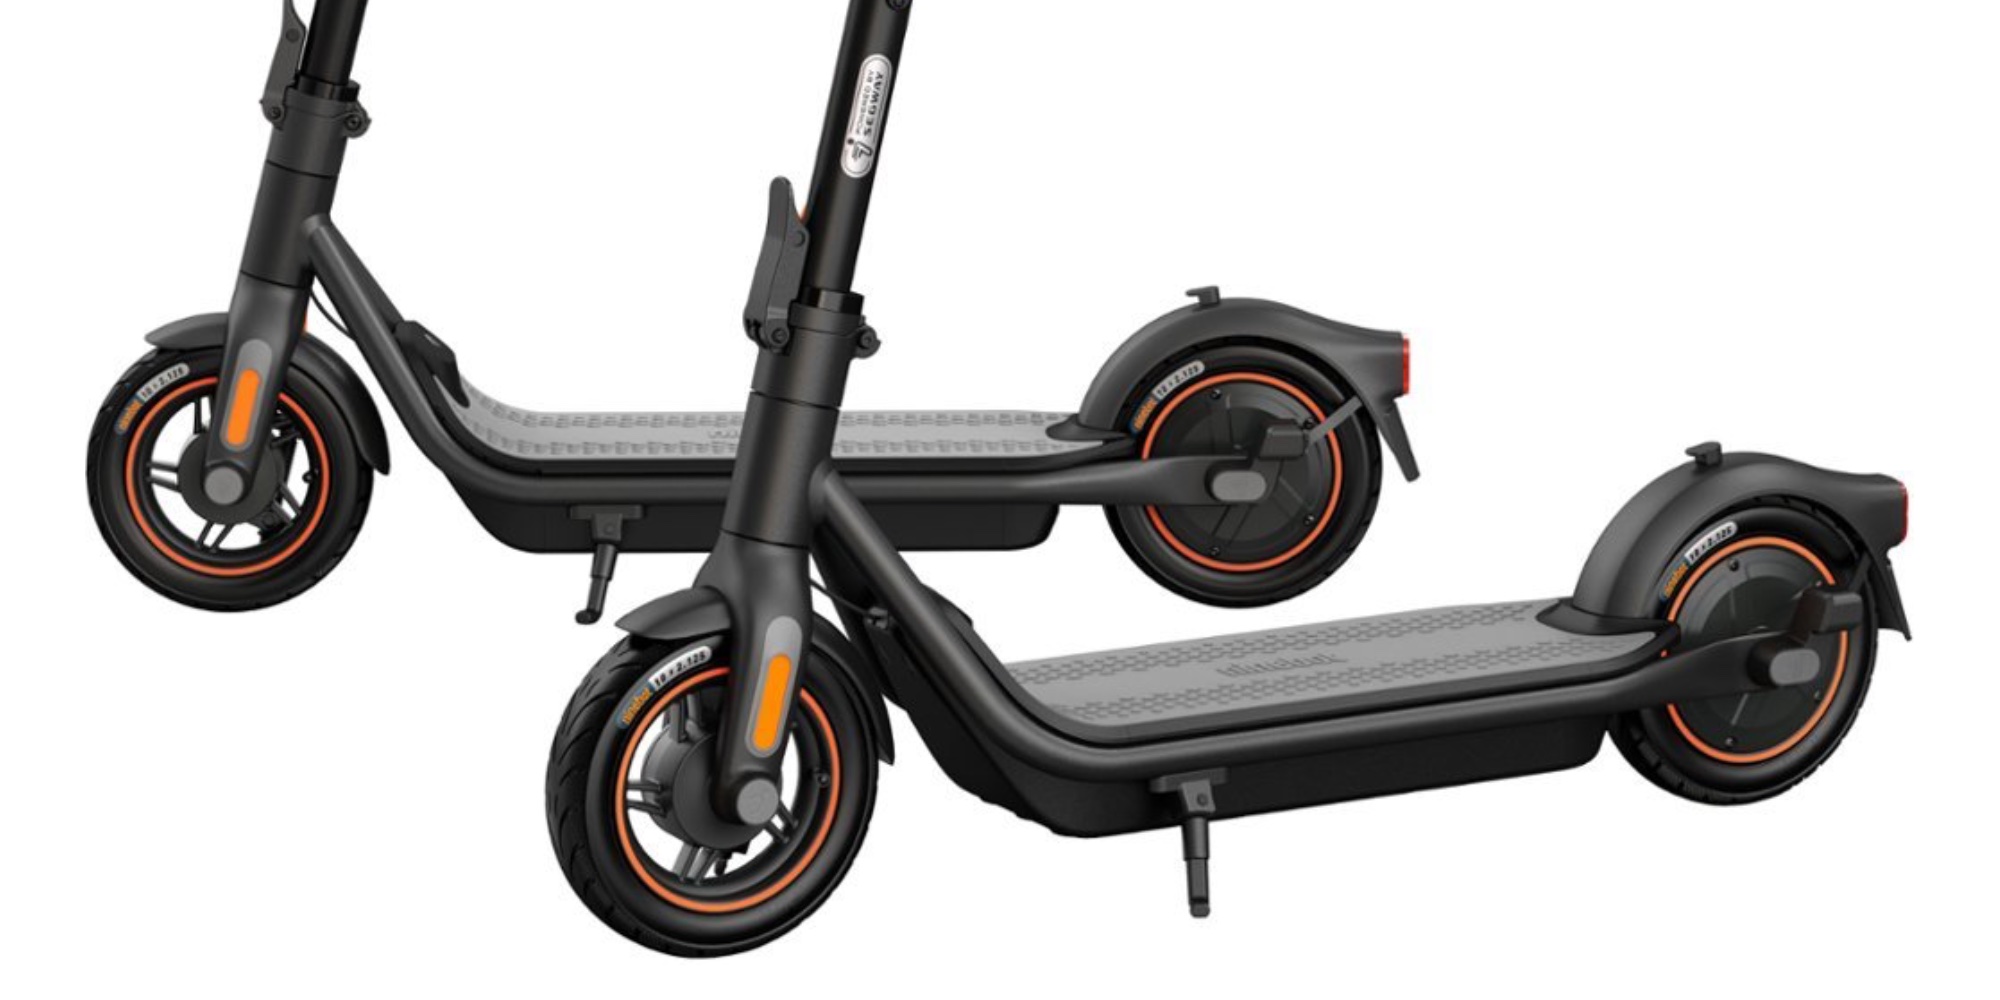 Segway's latest F series electric scooters now start at $350 (Save $100+), $143